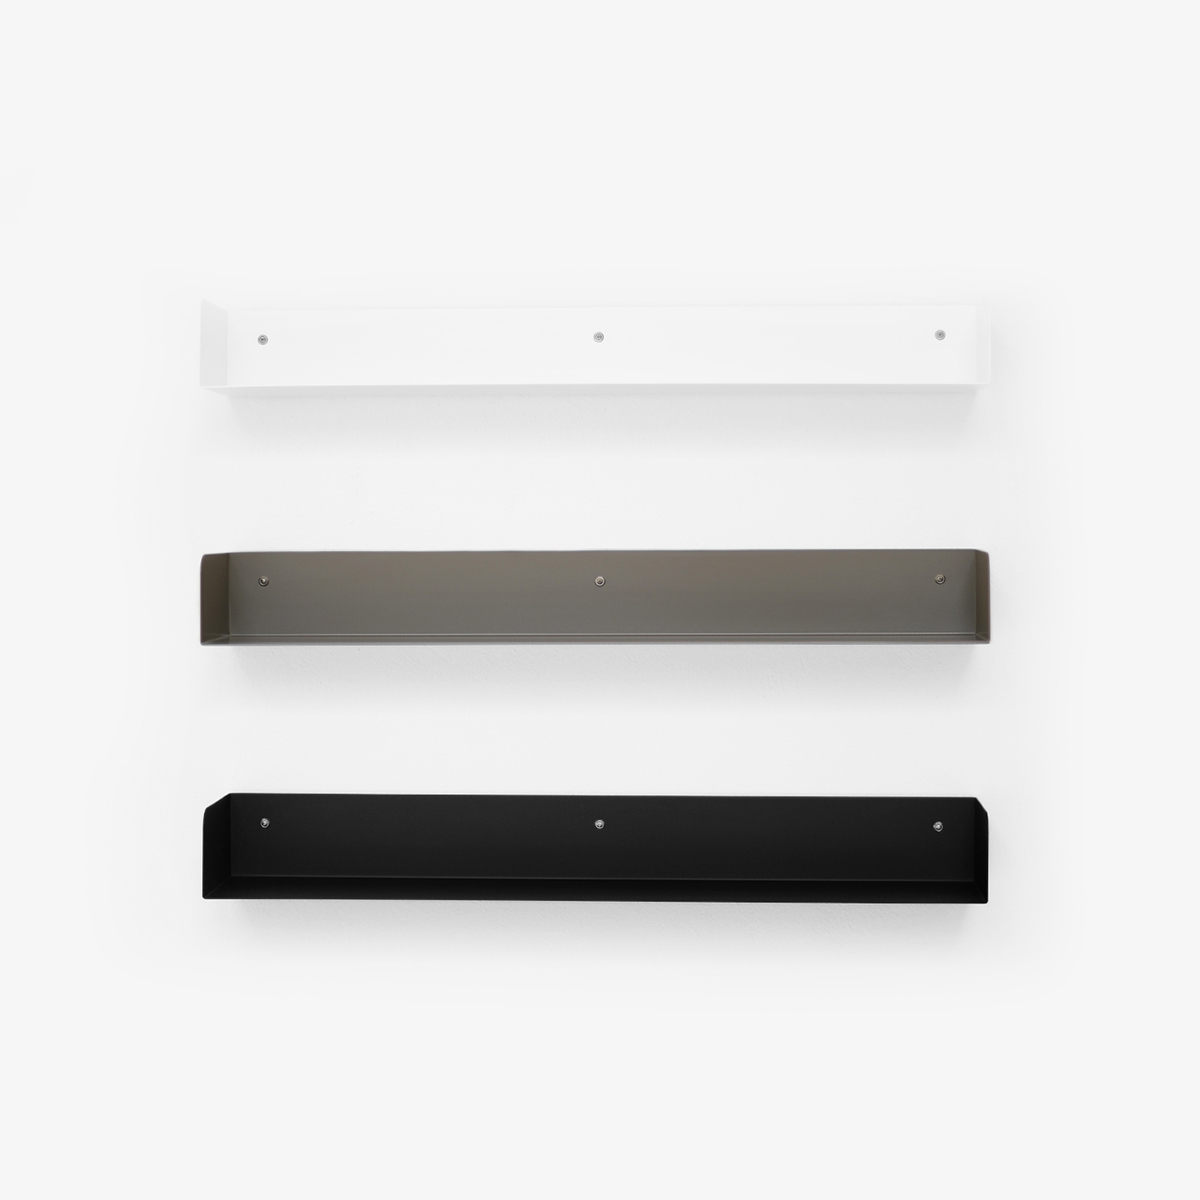 Poggibonsi shelf from Atelier Haussmann is made of  a 2 mm steel sheet and can be obtained in 3 different colors.